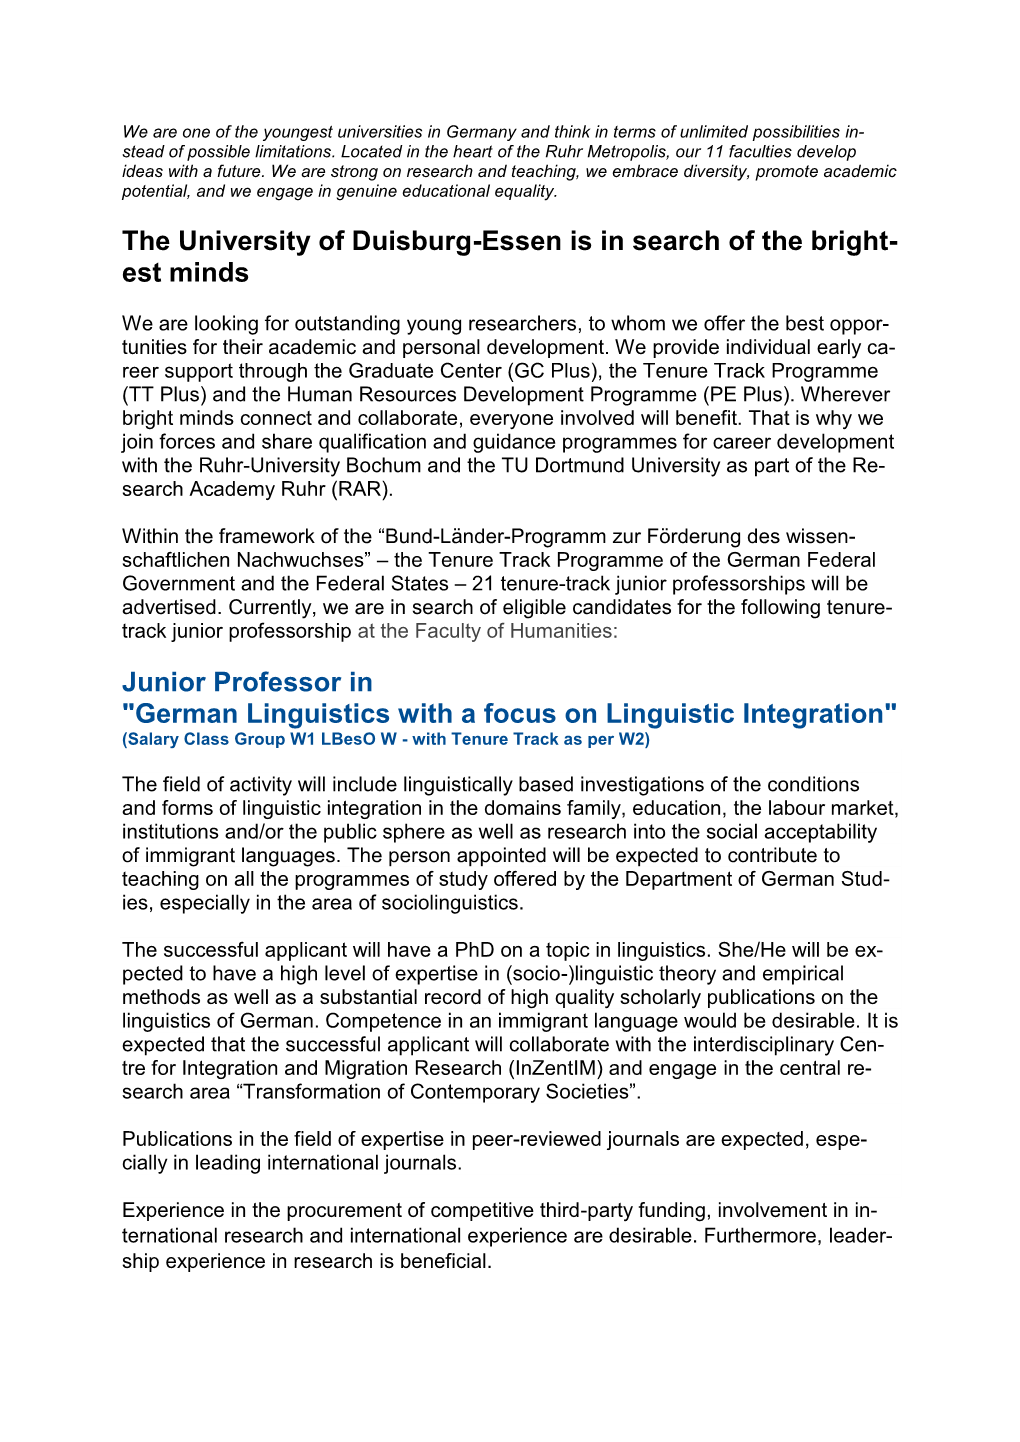 The University of Duisburg-Essen Is in Search of the Bright- Est Minds Junior Professor in "German Linguistics with a Focus